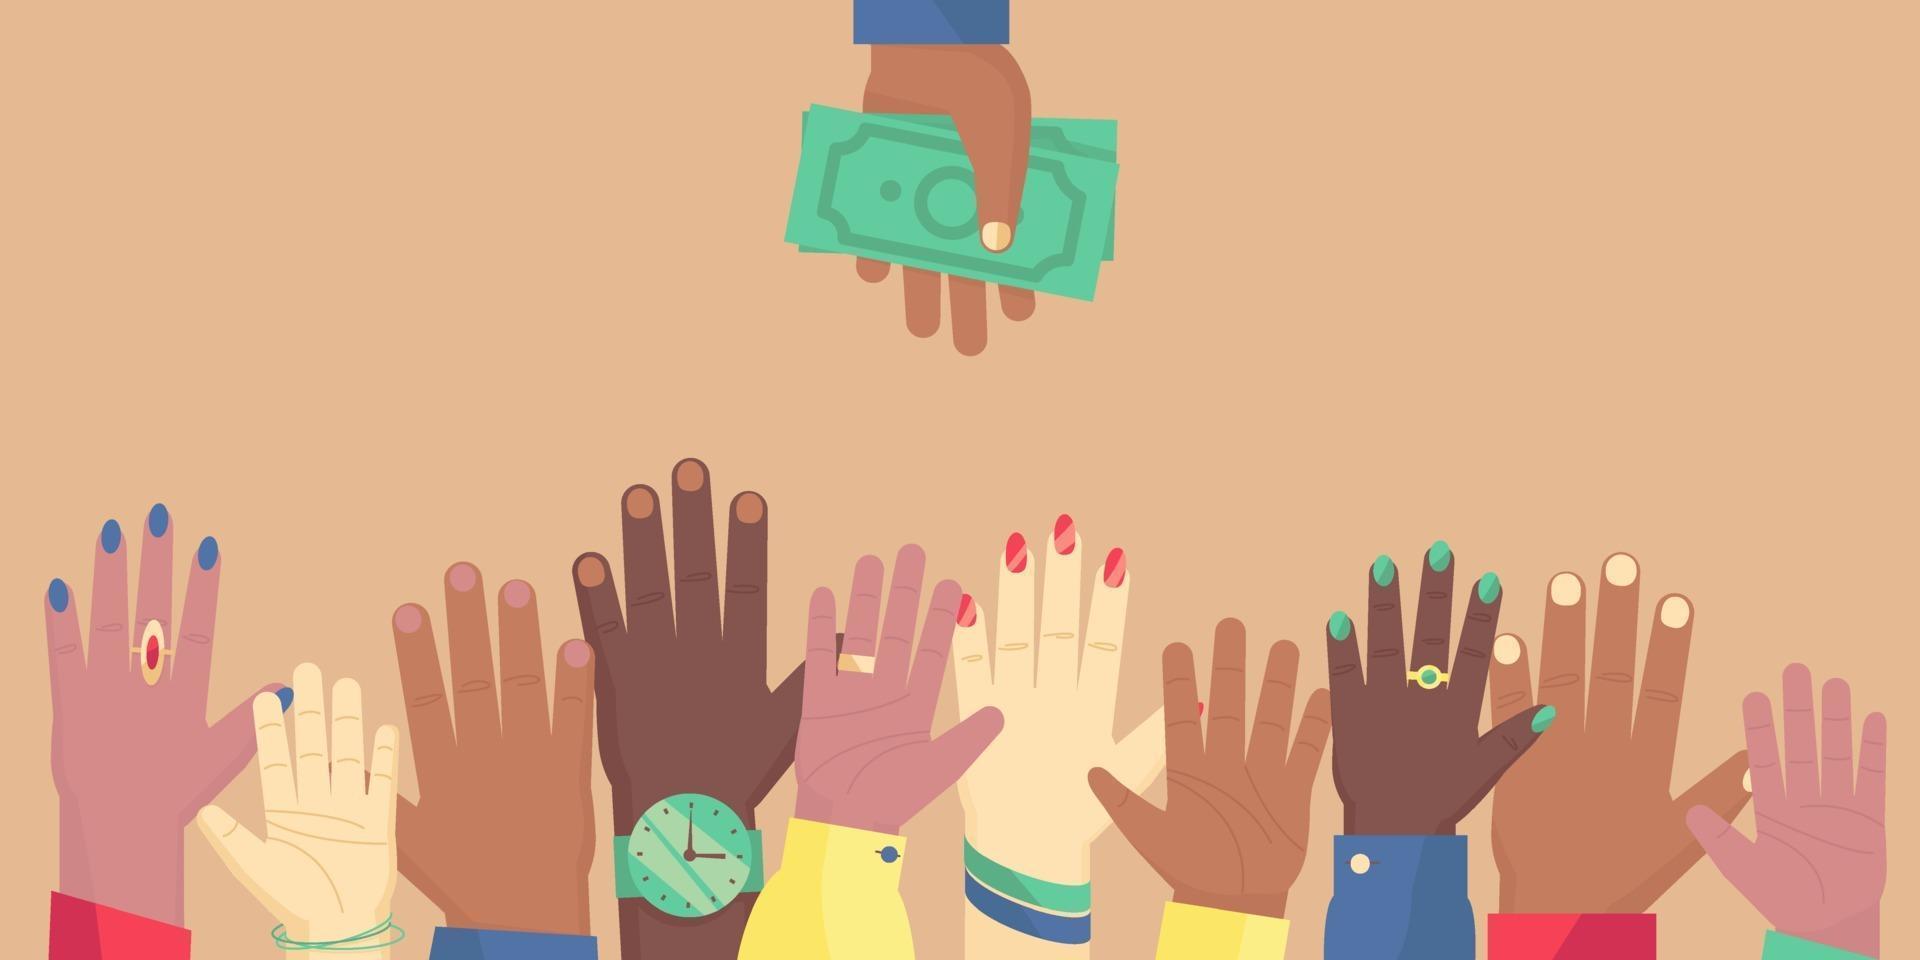 People's hands stretch up to the hand with dollar bills vector